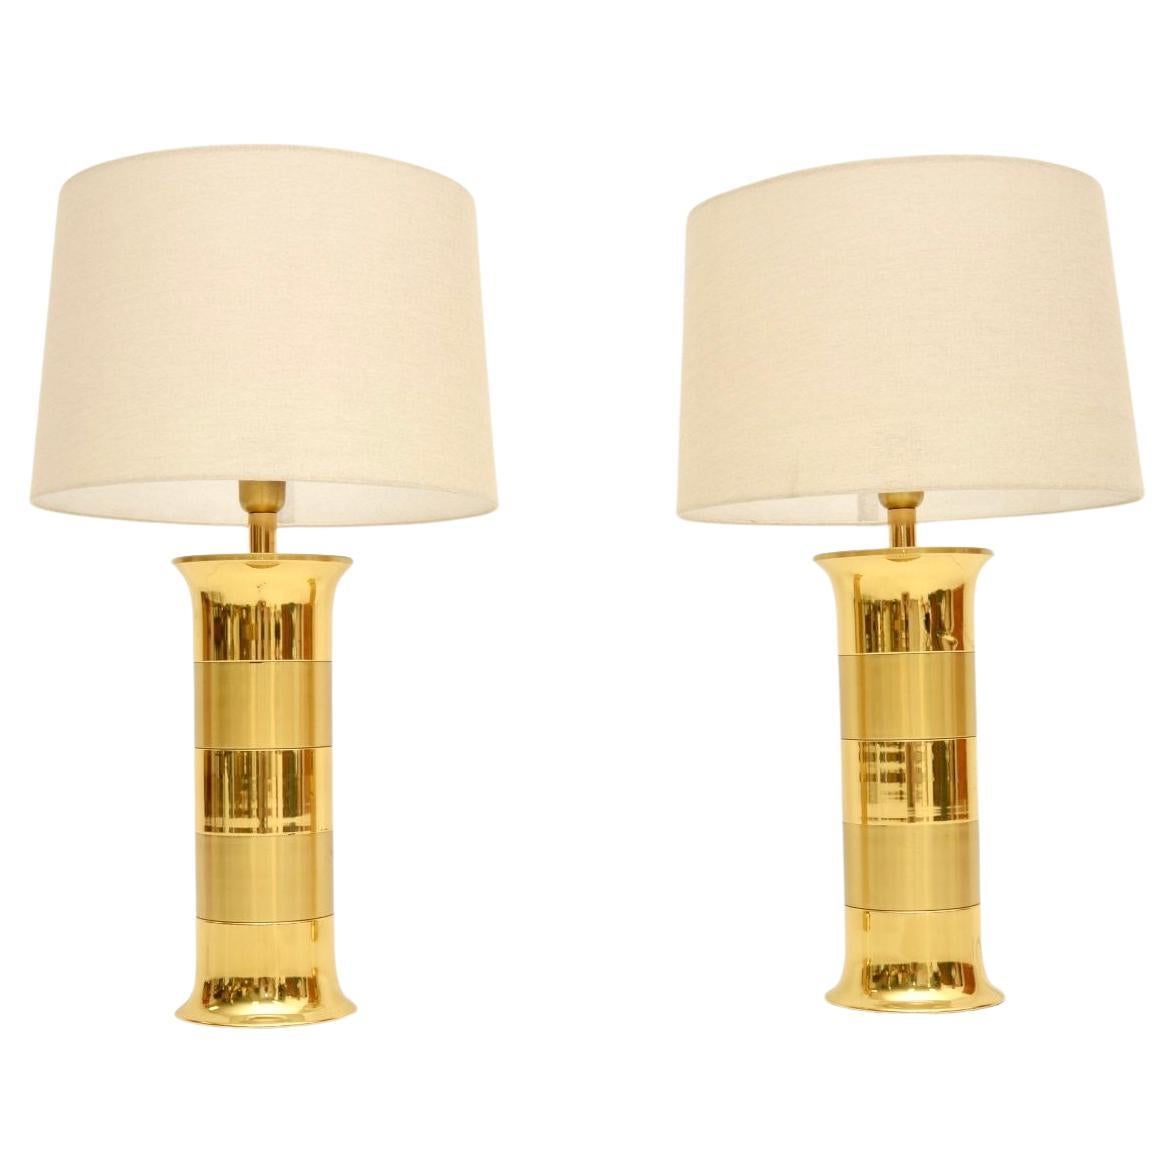 Pair of Large Vintage Brass Table Lamps